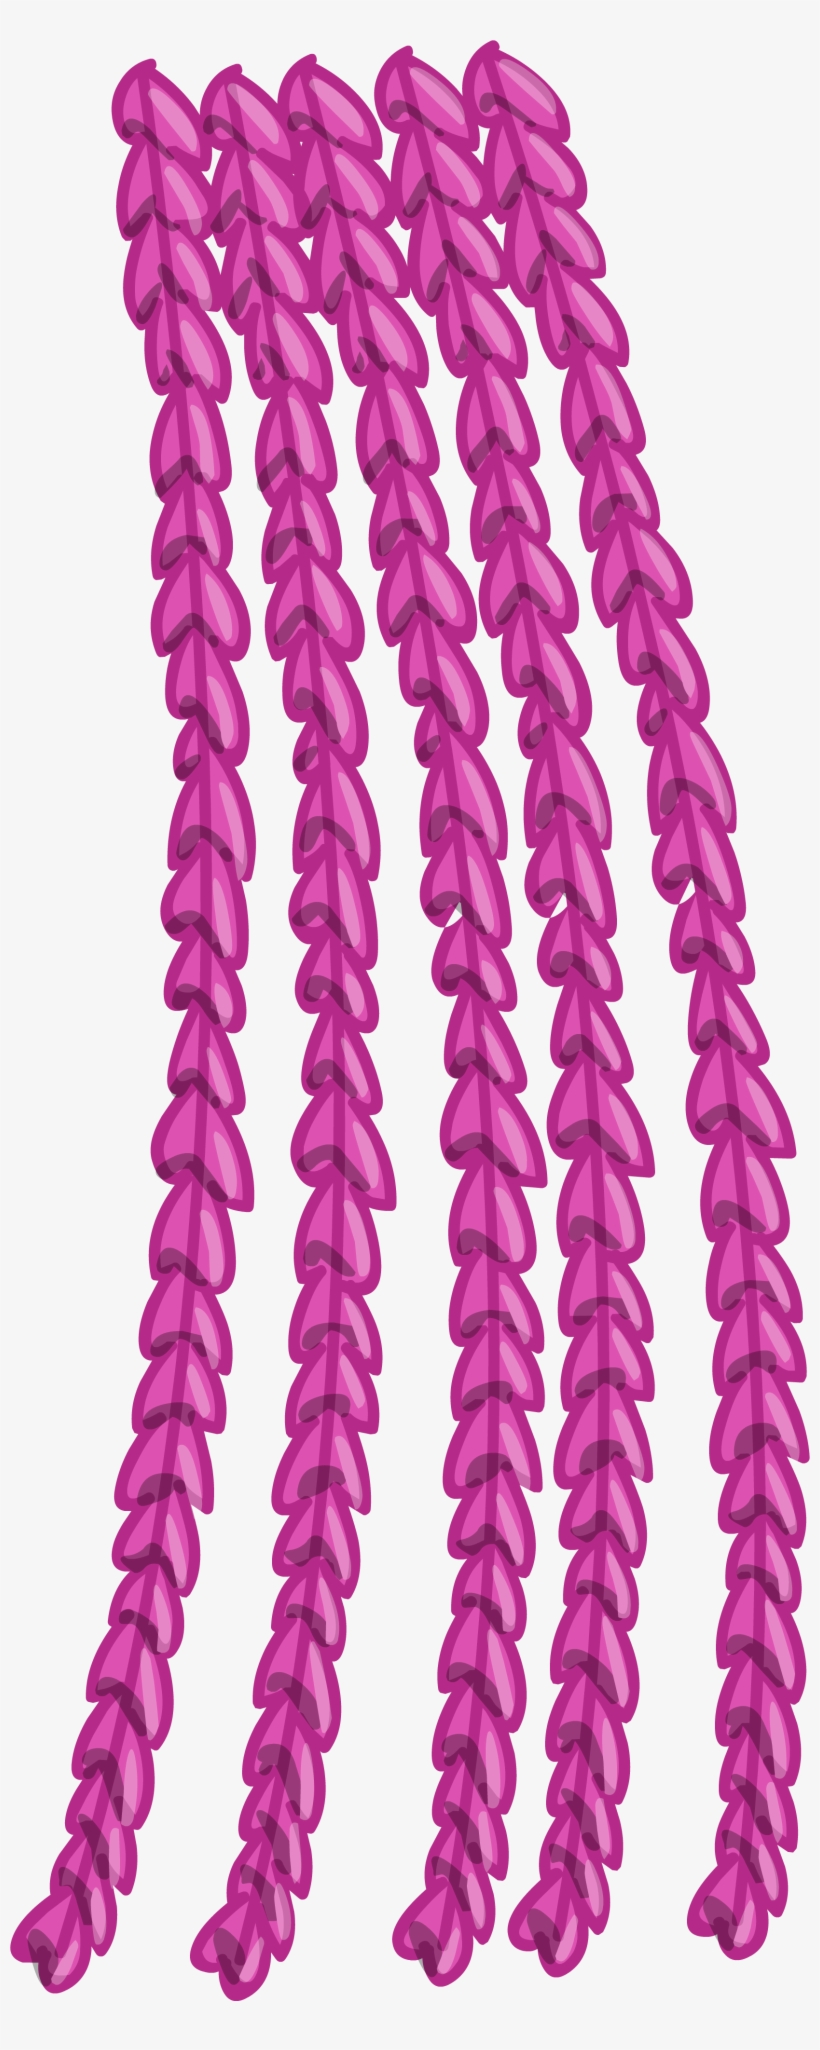 Streamers Png - Skipping Rope, transparent png #8936956